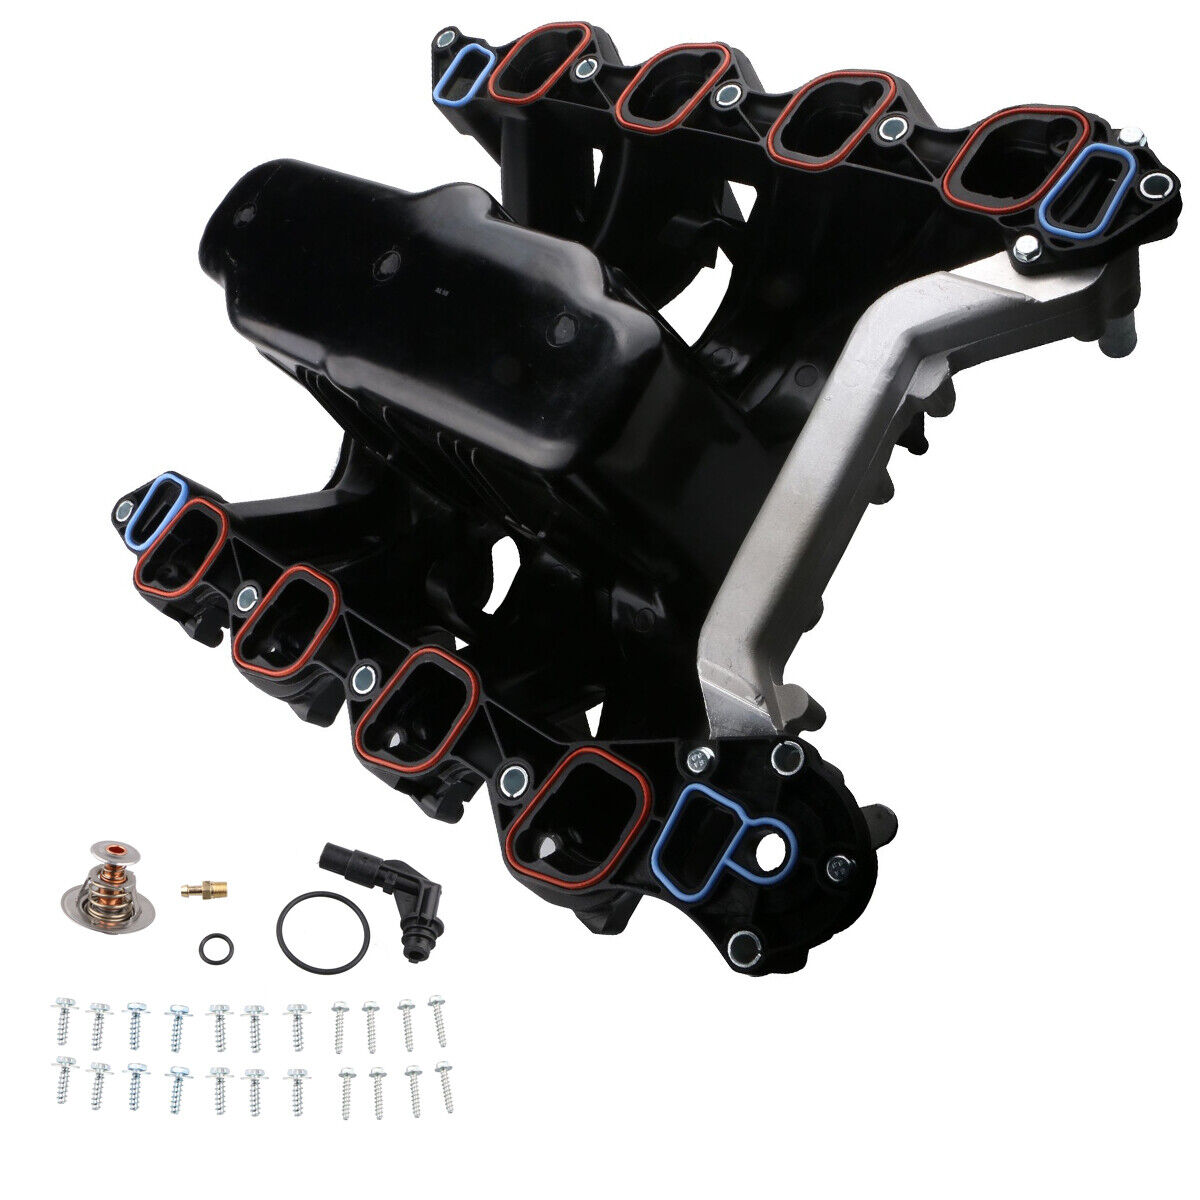 Upper Intake Manifold For Ford Expedition F150-F350 Excursion 5.4L V8 w/ Gaskets